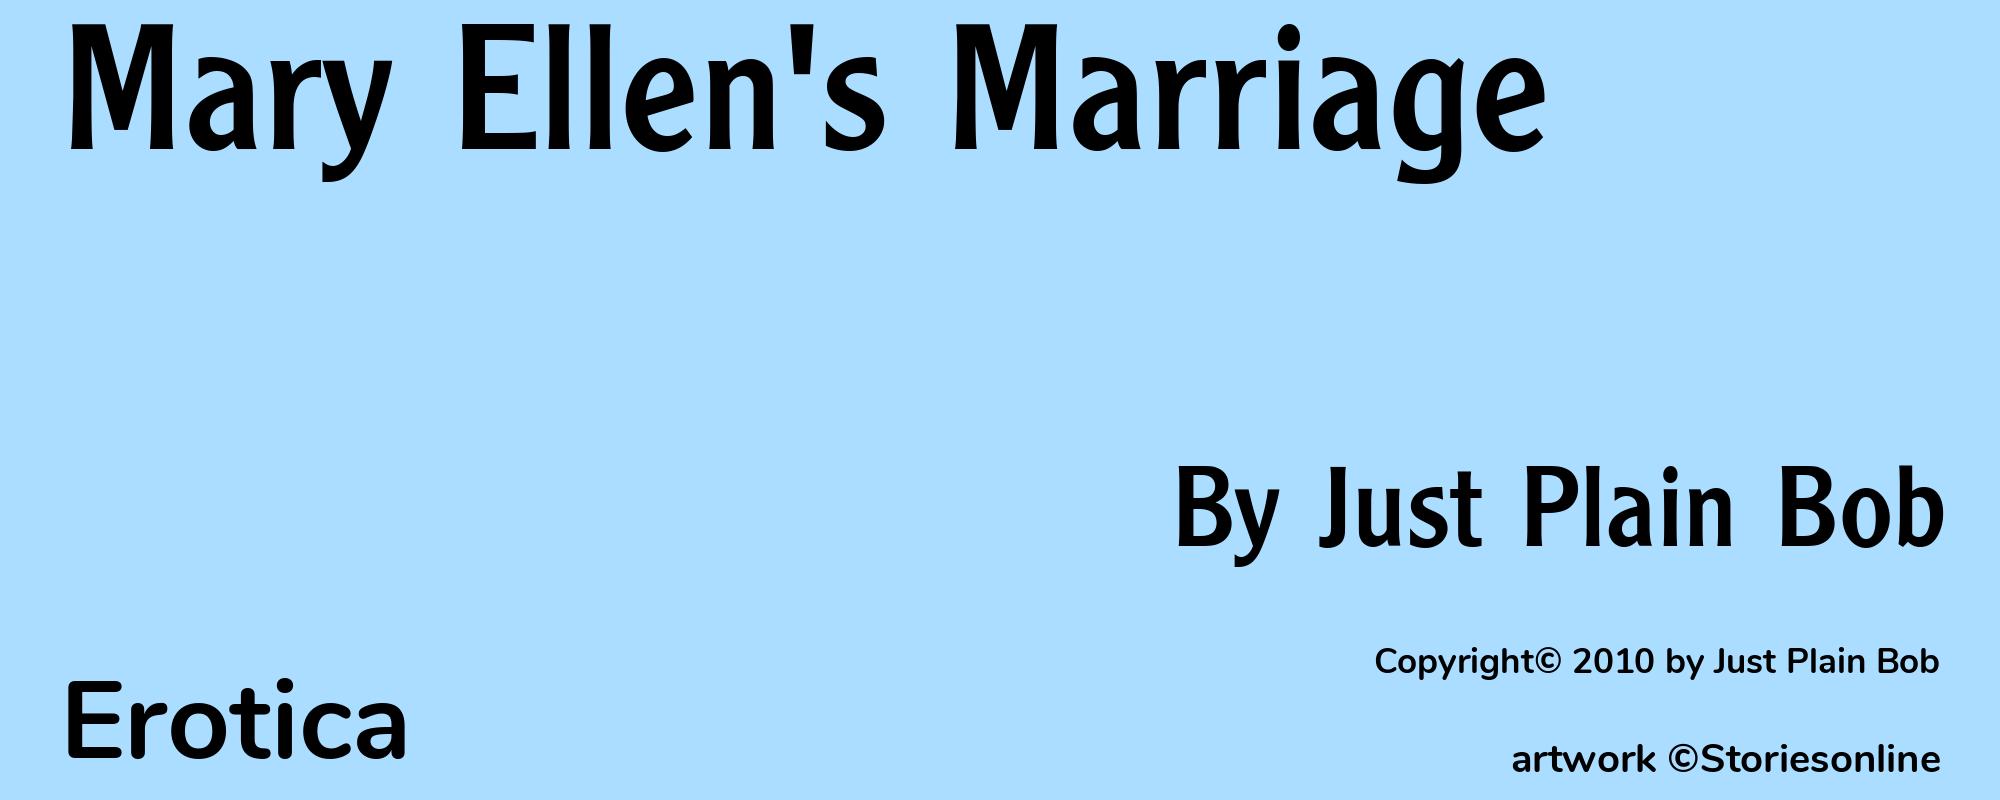 Mary Ellen's Marriage - Cover